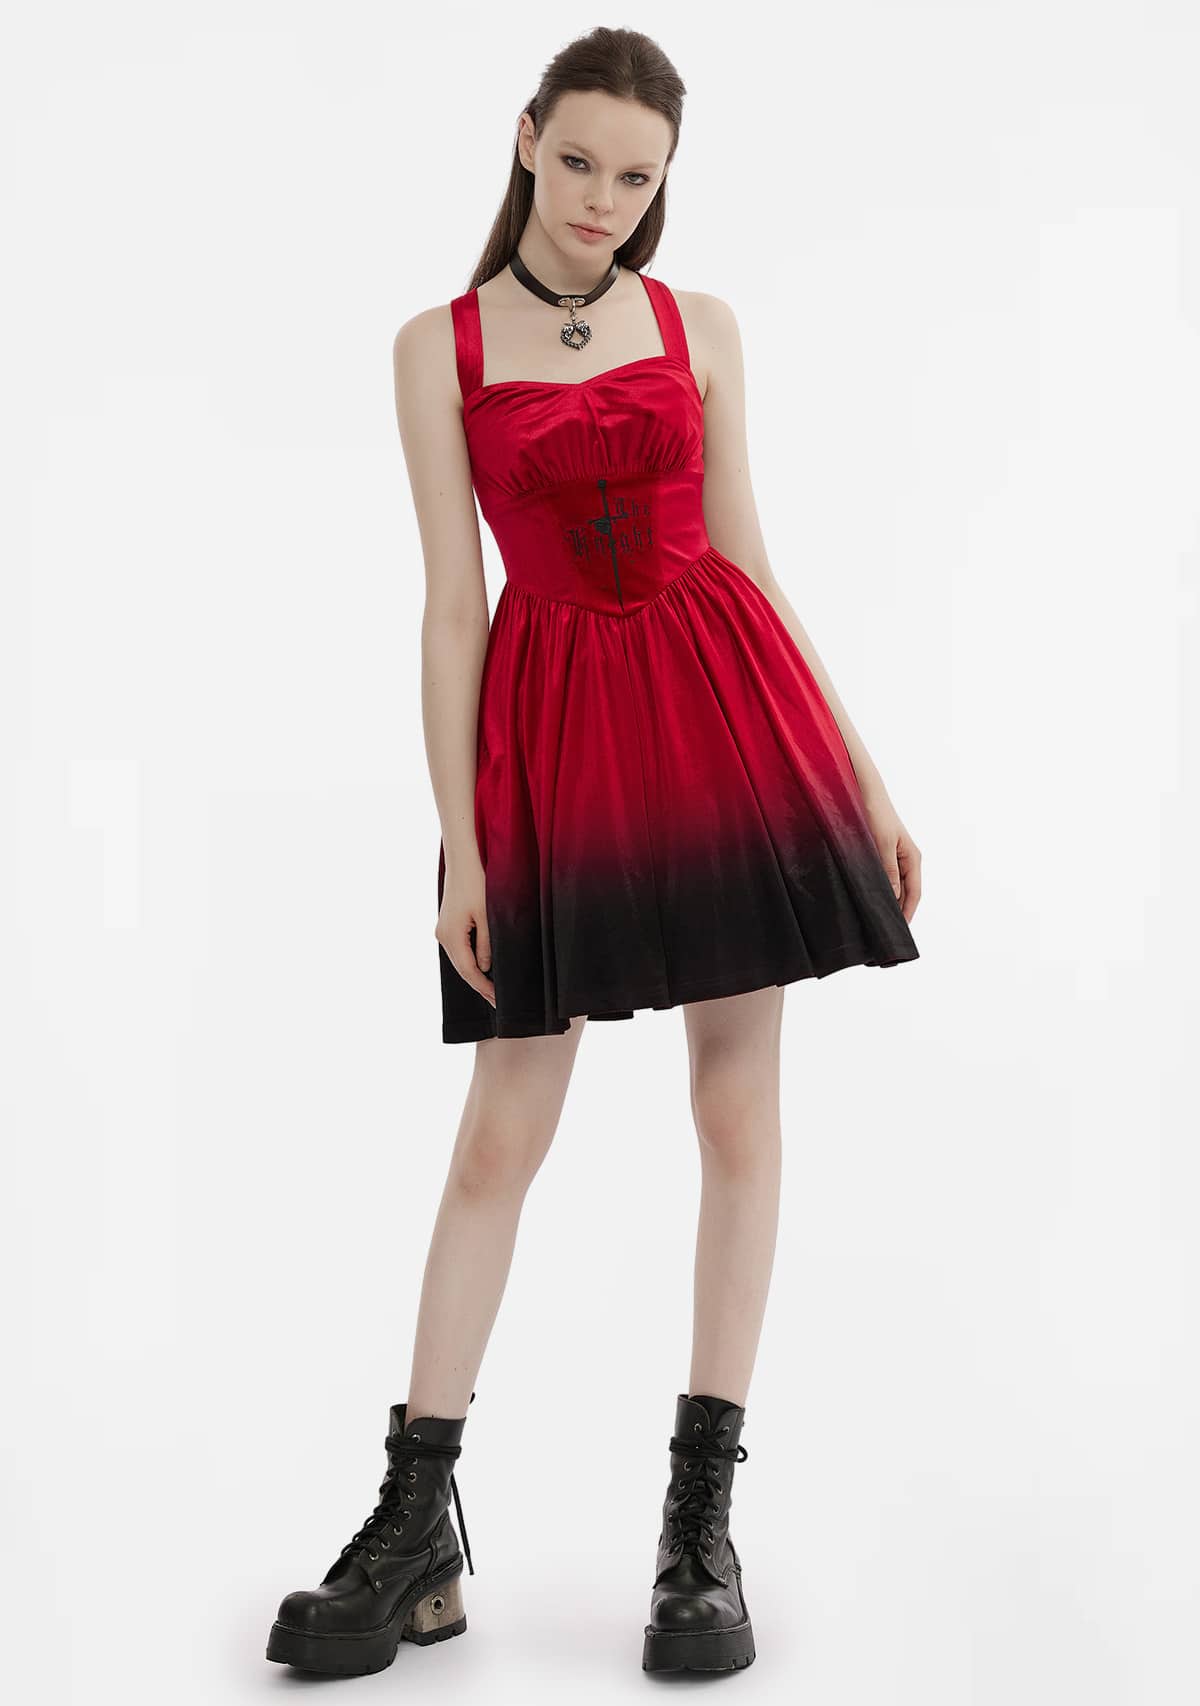 Gothic The Knight Embroidered Gradient Slip Dress